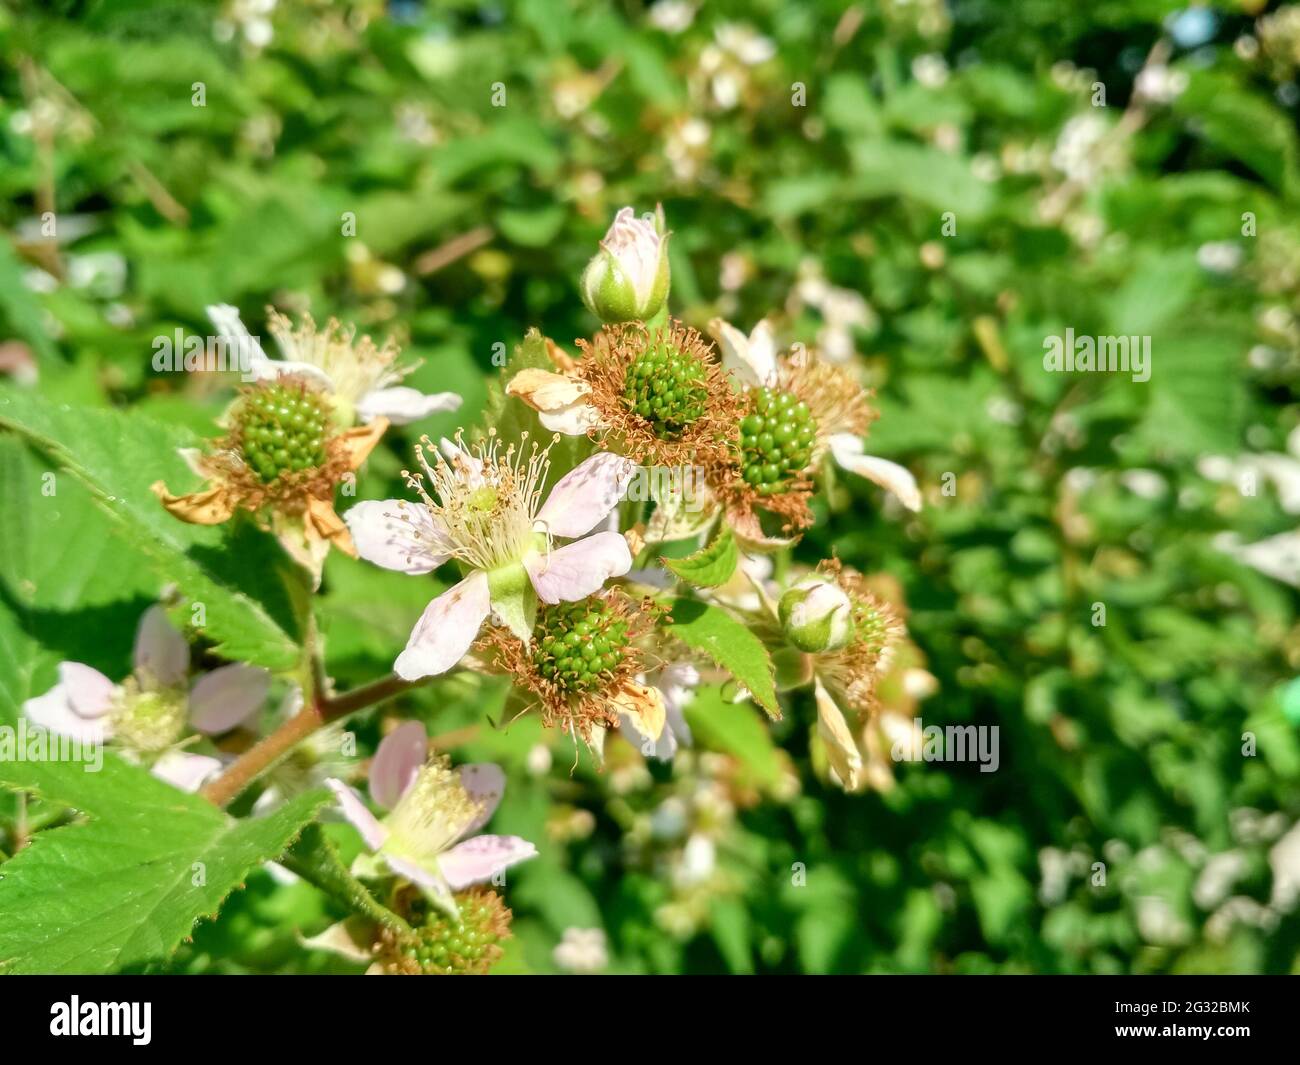 Berry background. Close up of Blackberry flowering bush. Unripe blackberries on the bush with selective focus. Stock Photo